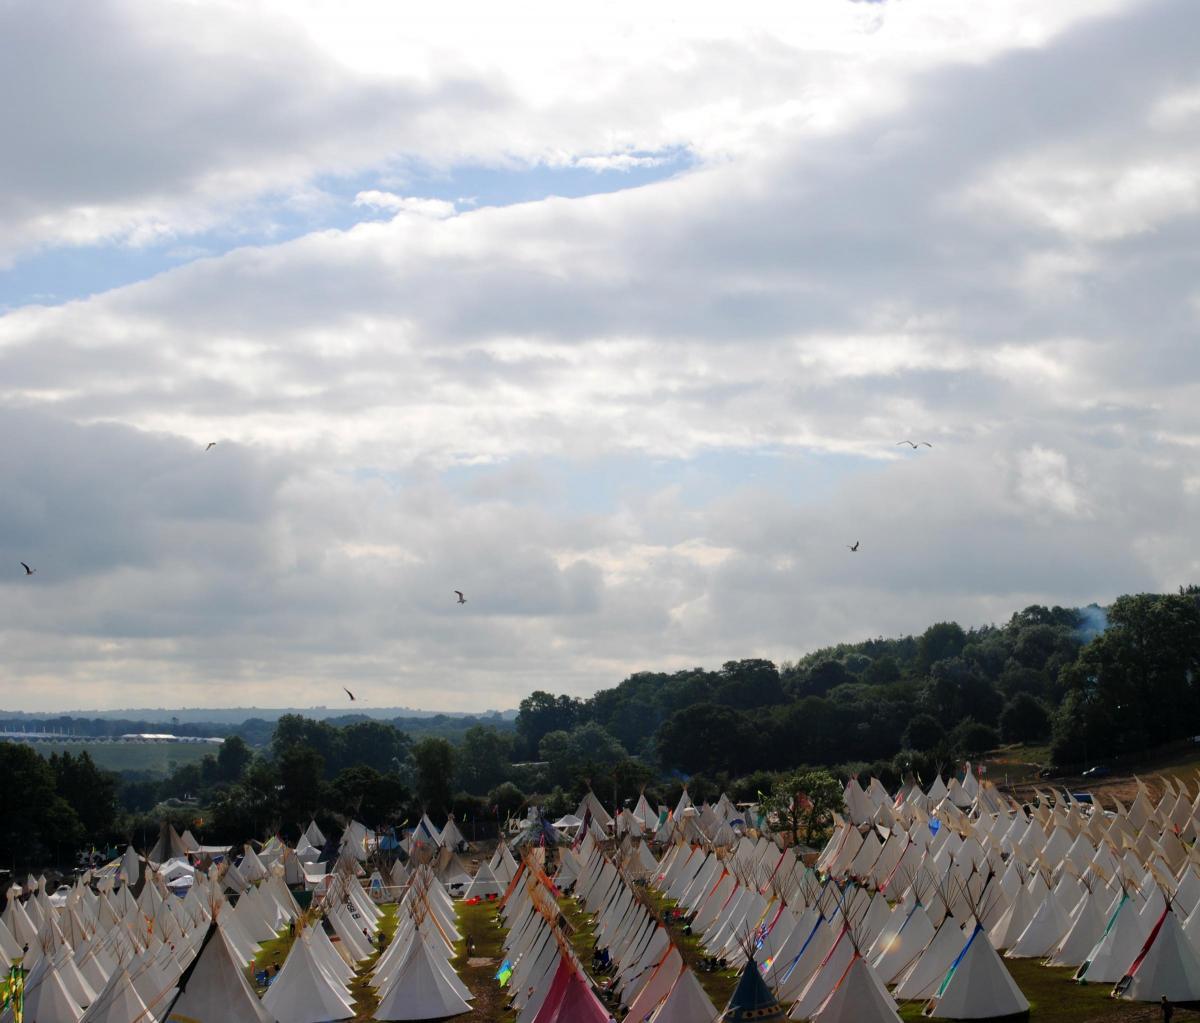 Pictures from the Glastonbury Festival 2016 at Worthy Farm, Pilton, Somerset